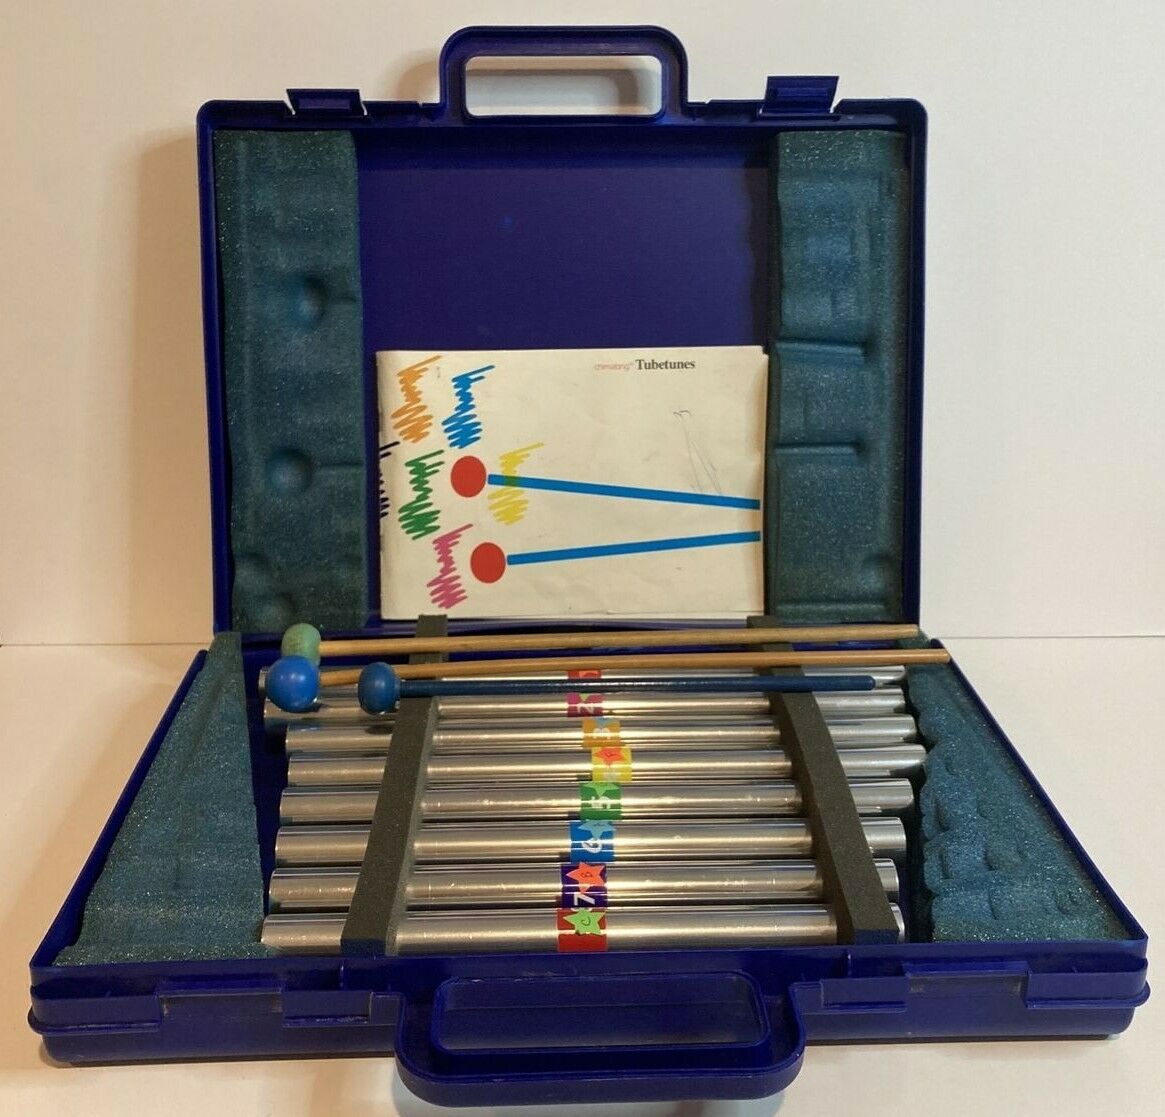 Vintage 1986 Chimalong Xylophone Tubetunes Woodstock Percussion With Case